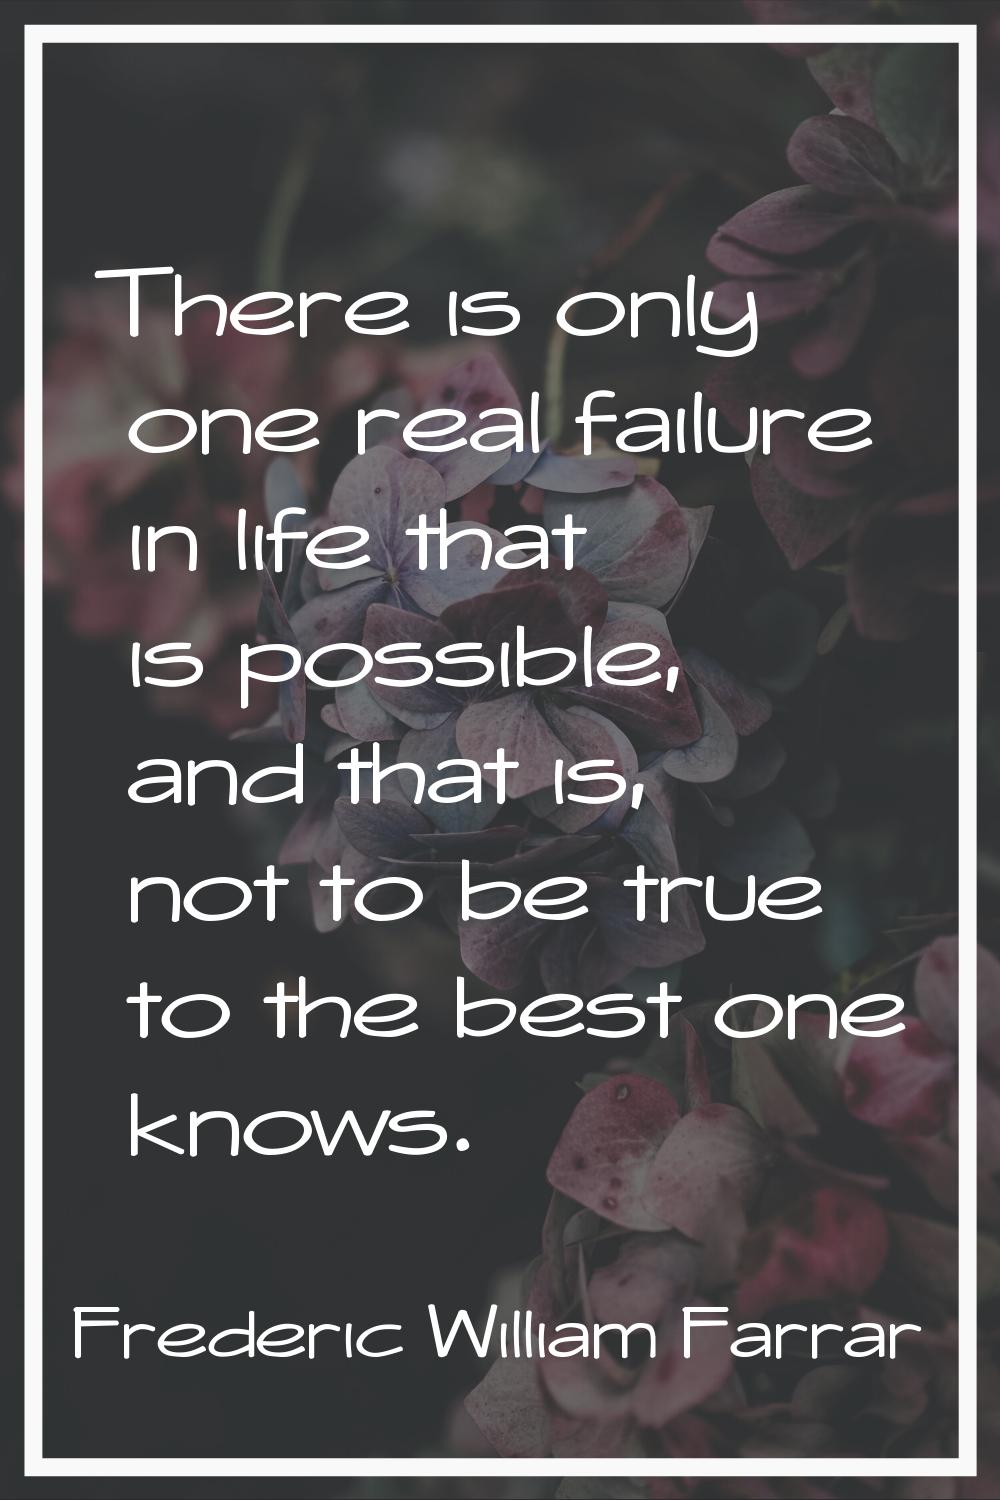 There is only one real failure in life that is possible, and that is, not to be true to the best on